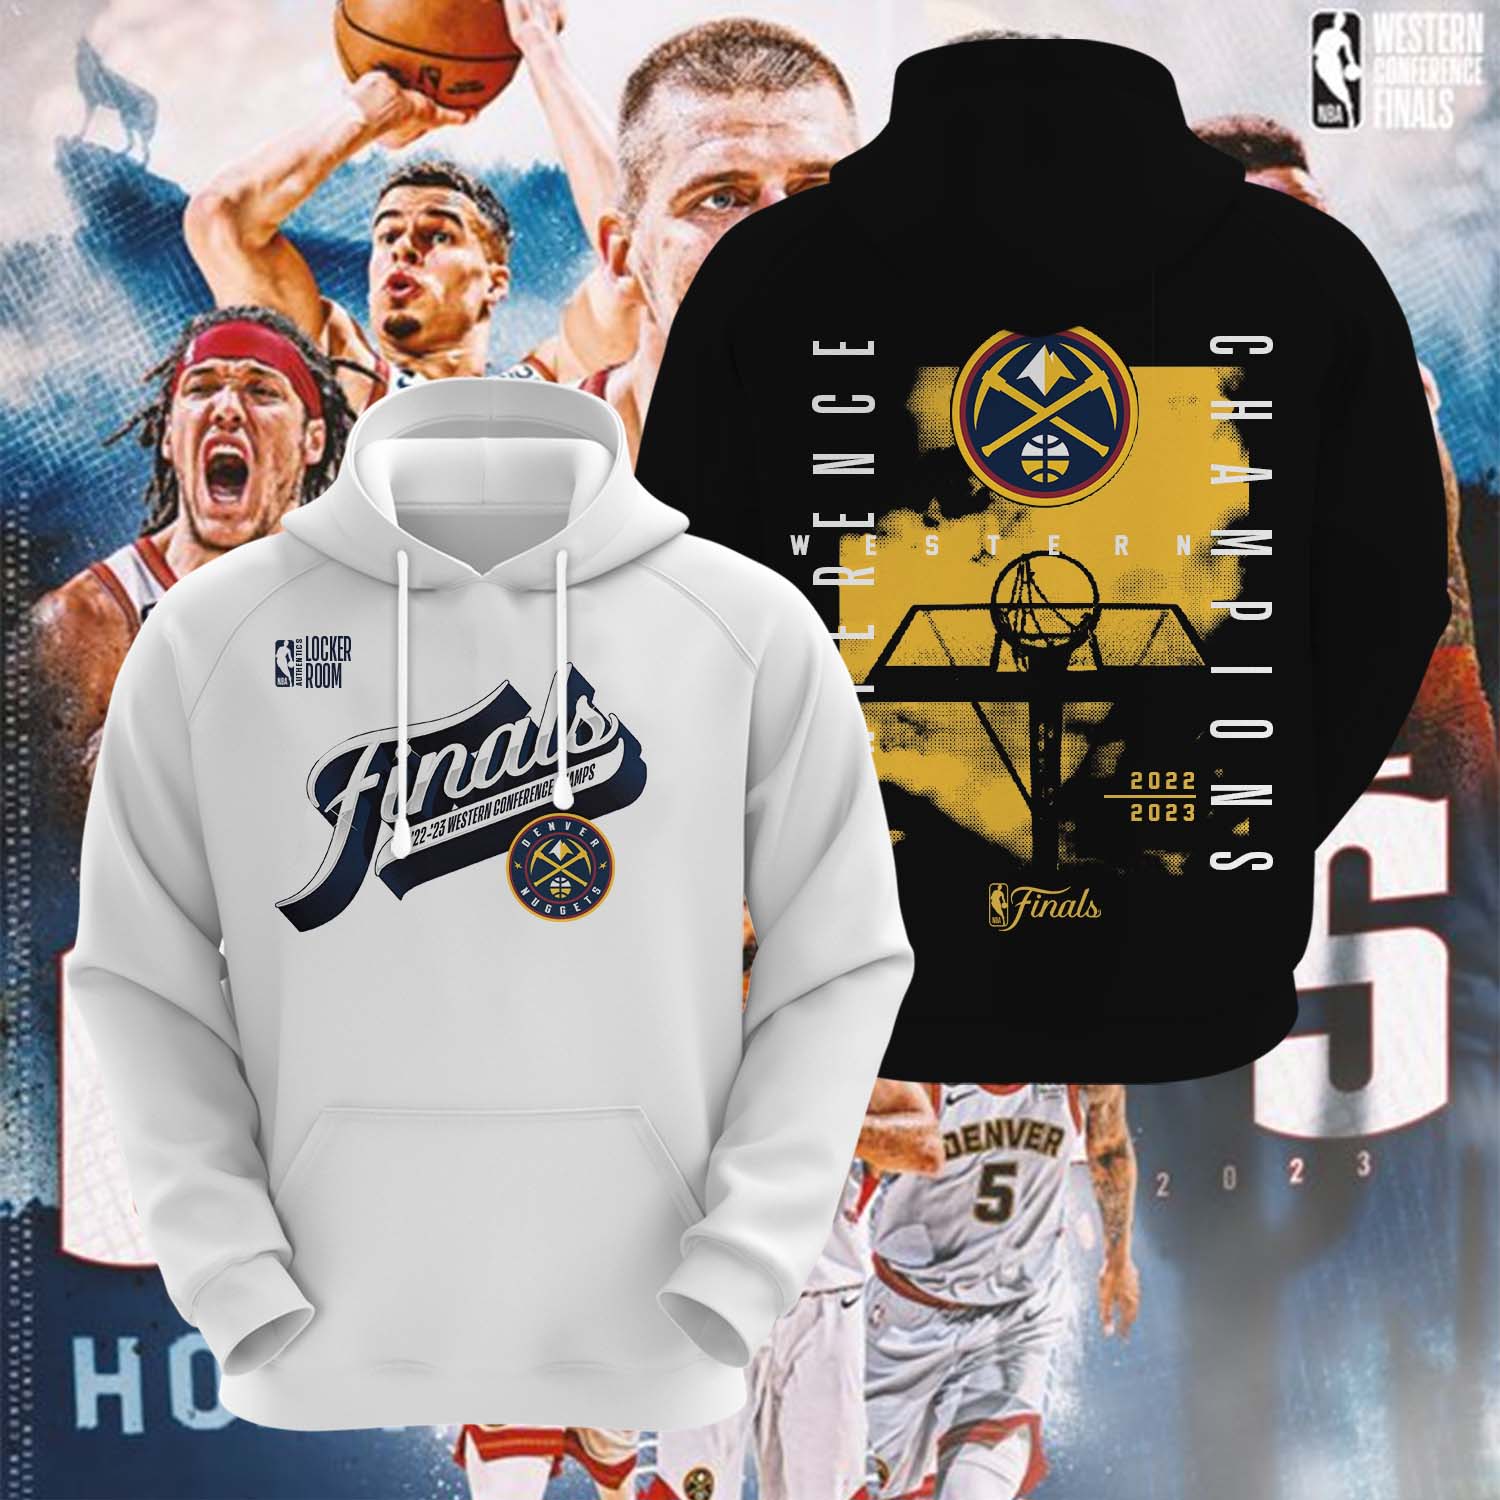 Denver Nuggets Sports 3D Pullover Hoodie